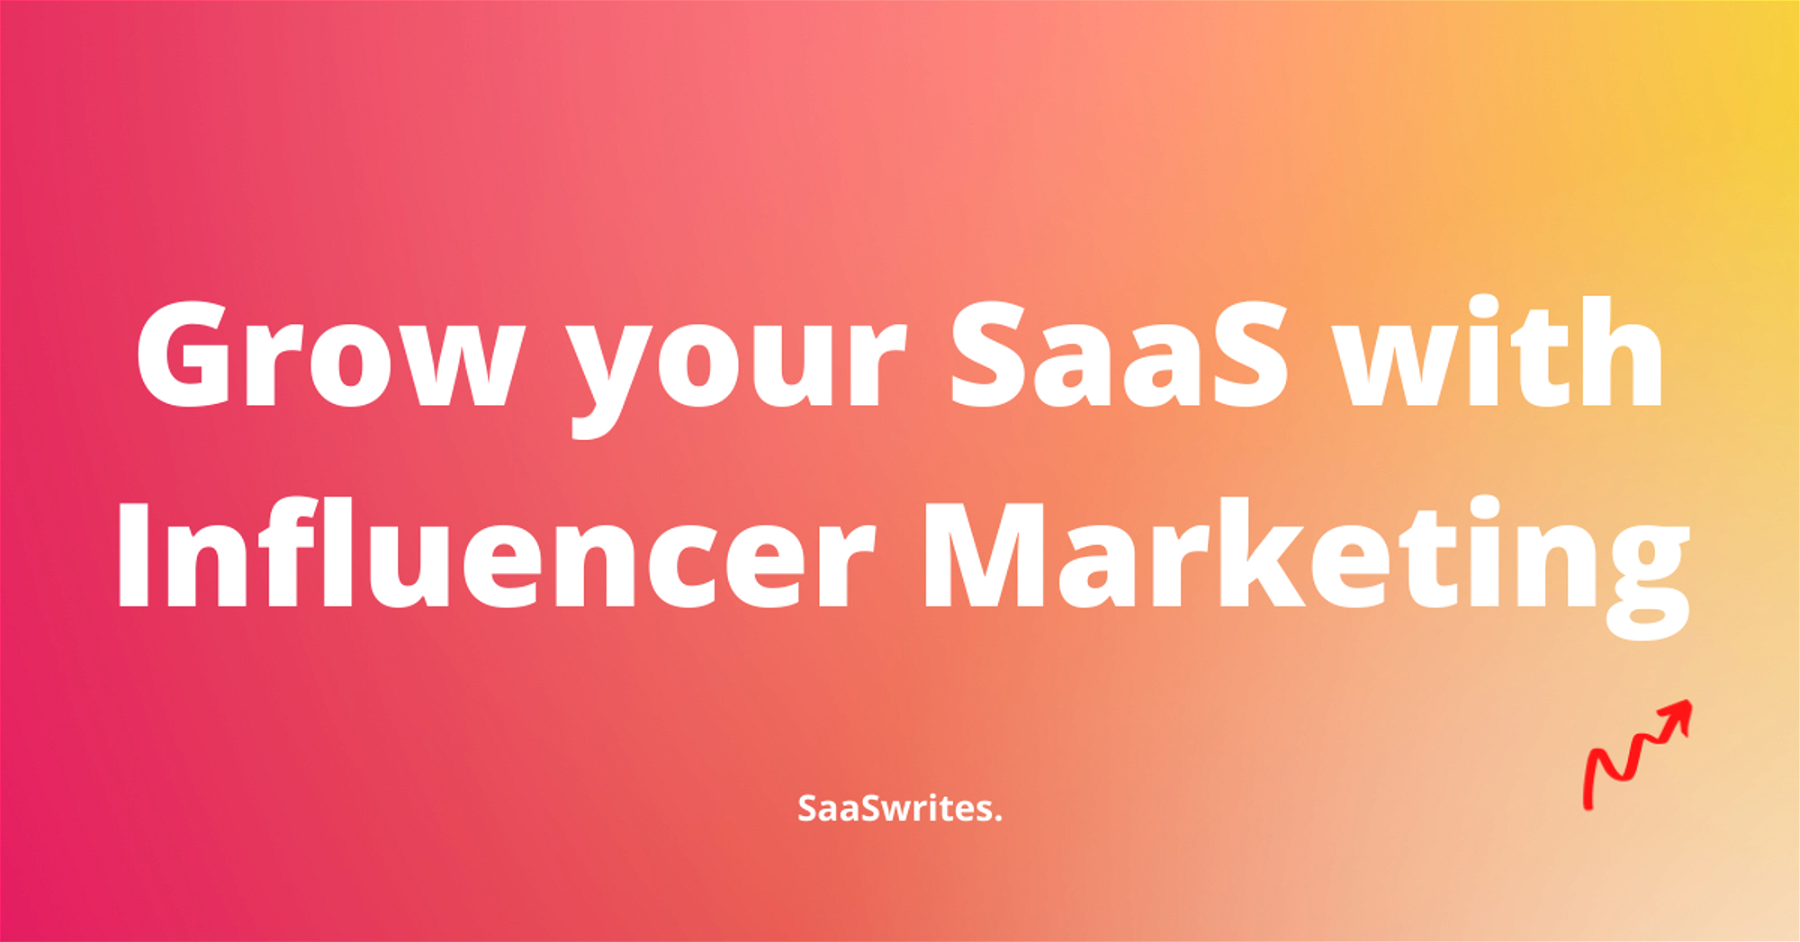 19+ expert tips to grow your SaaS with Influencer Marketing?